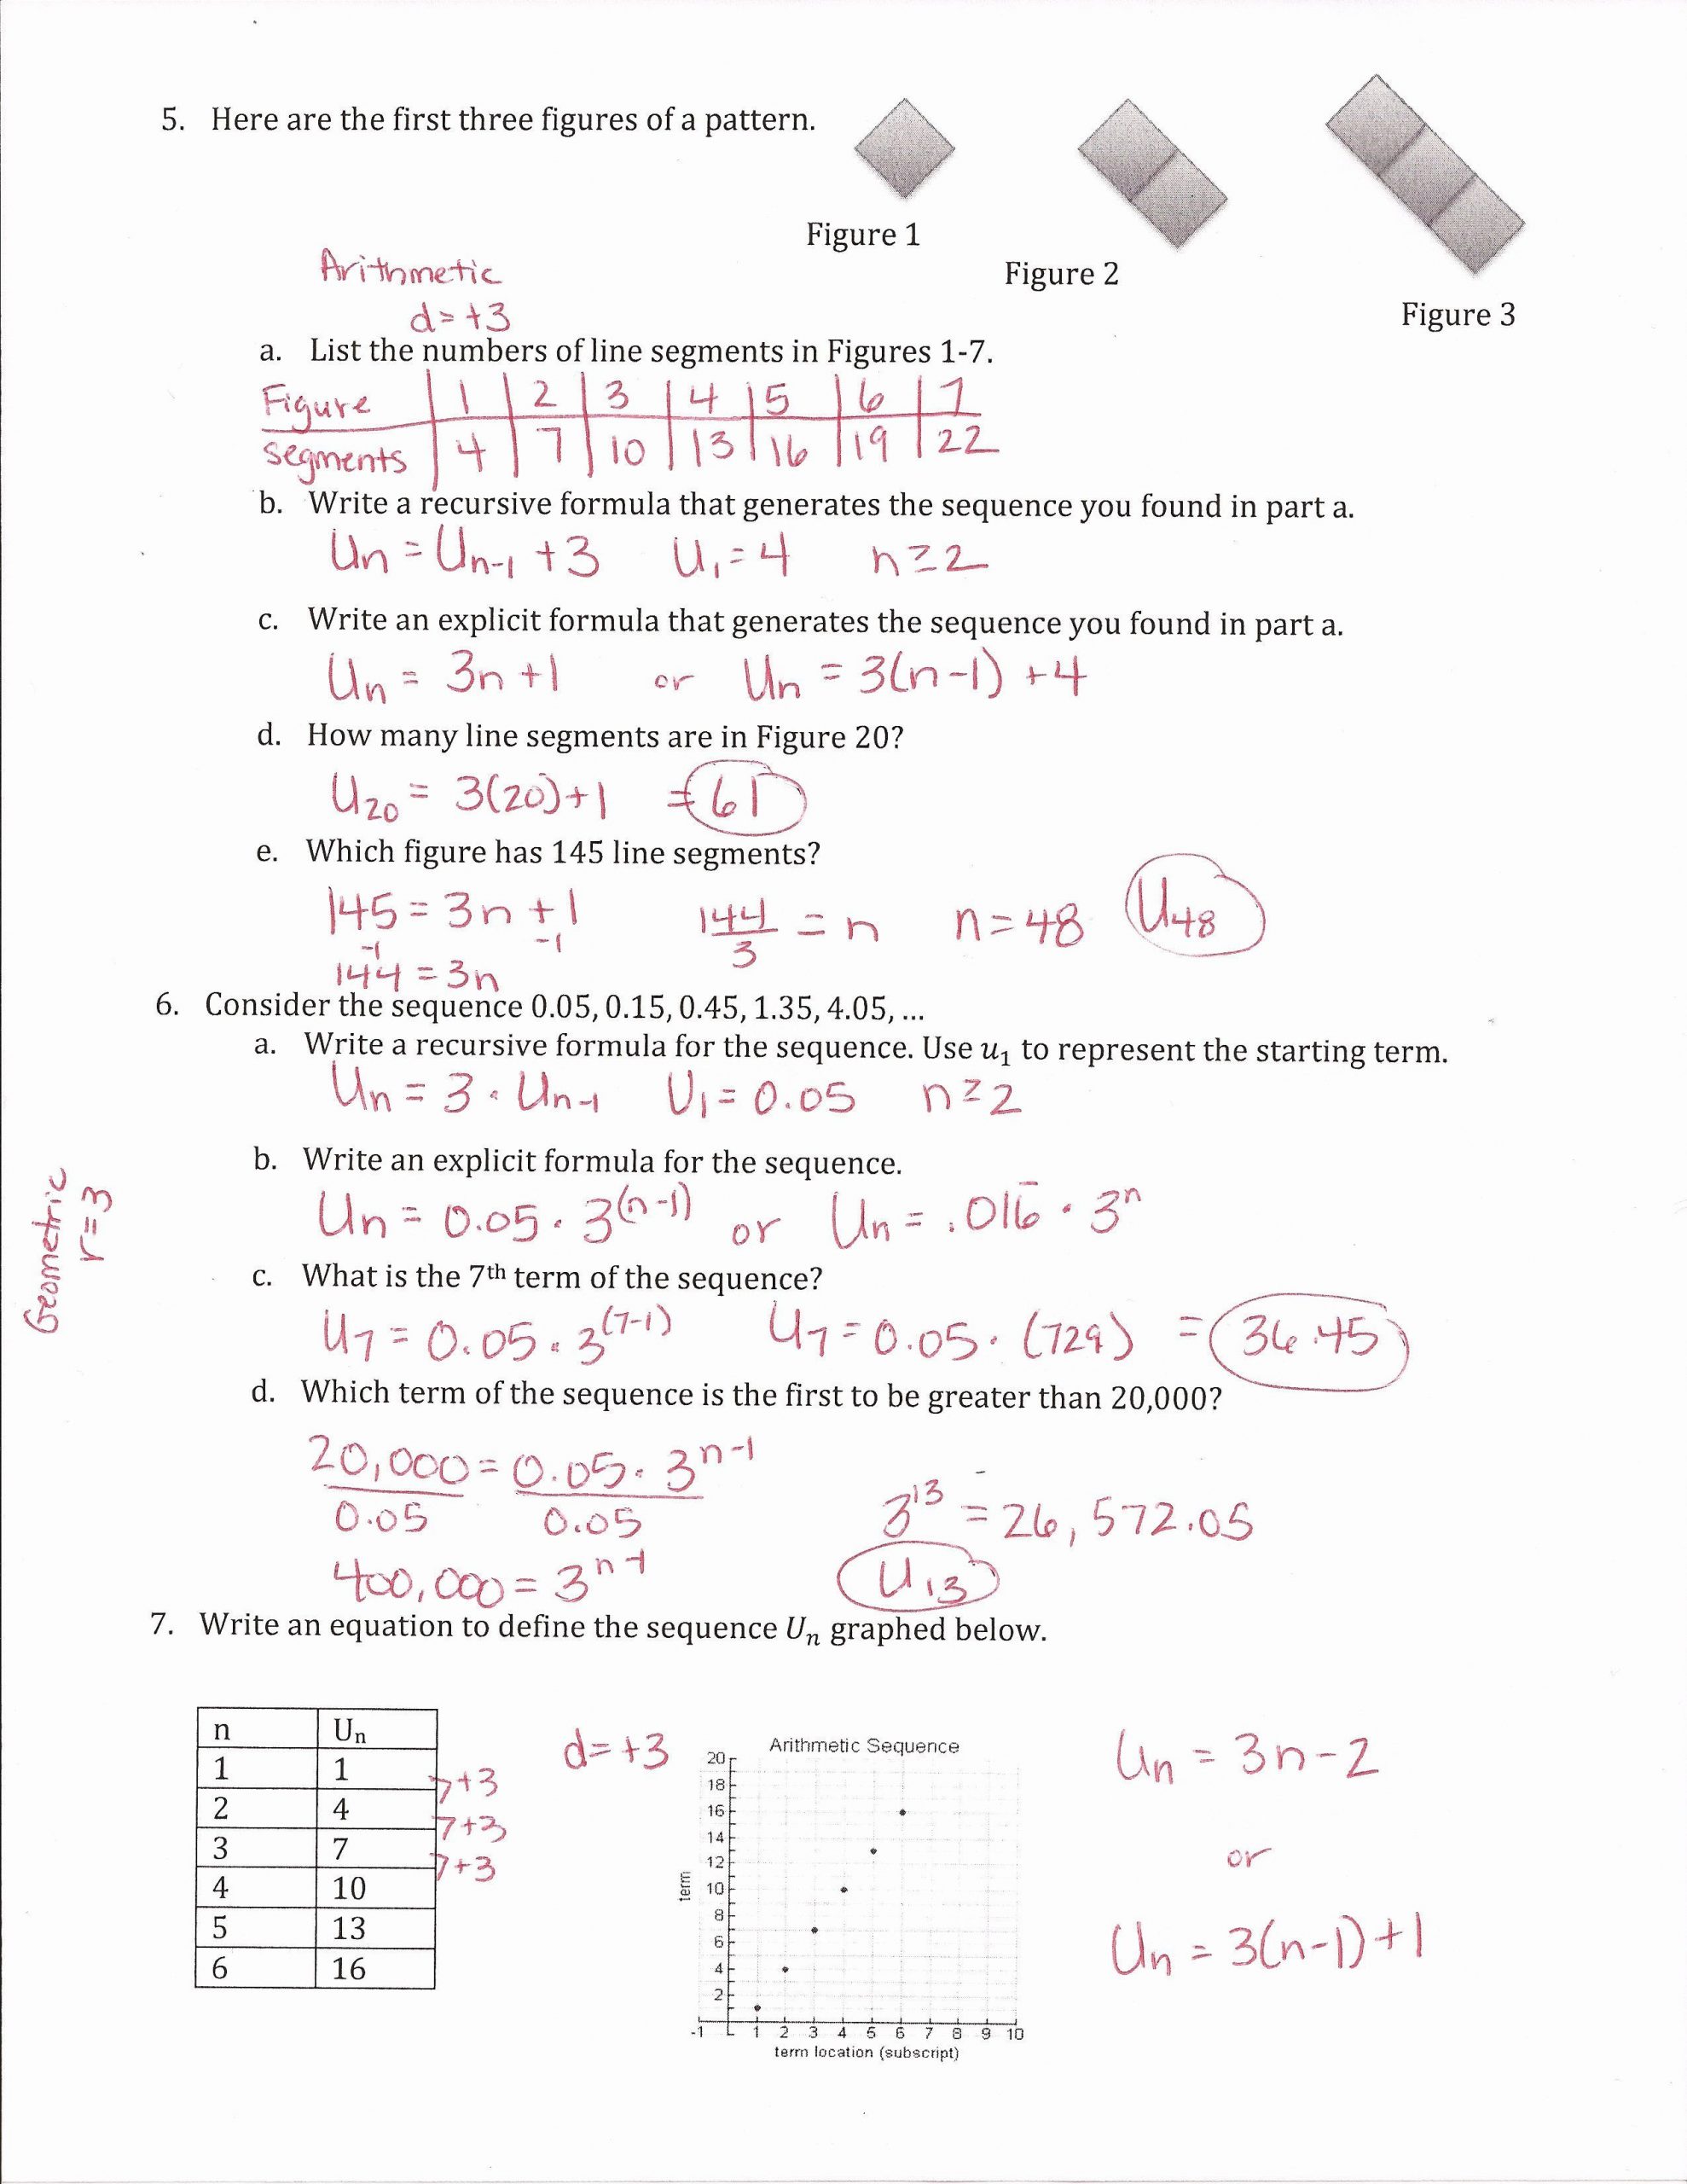 Geometric and Arithmetic Sequence Worksheet 50 Arithmetic Sequence Worksheet Answers In 2020